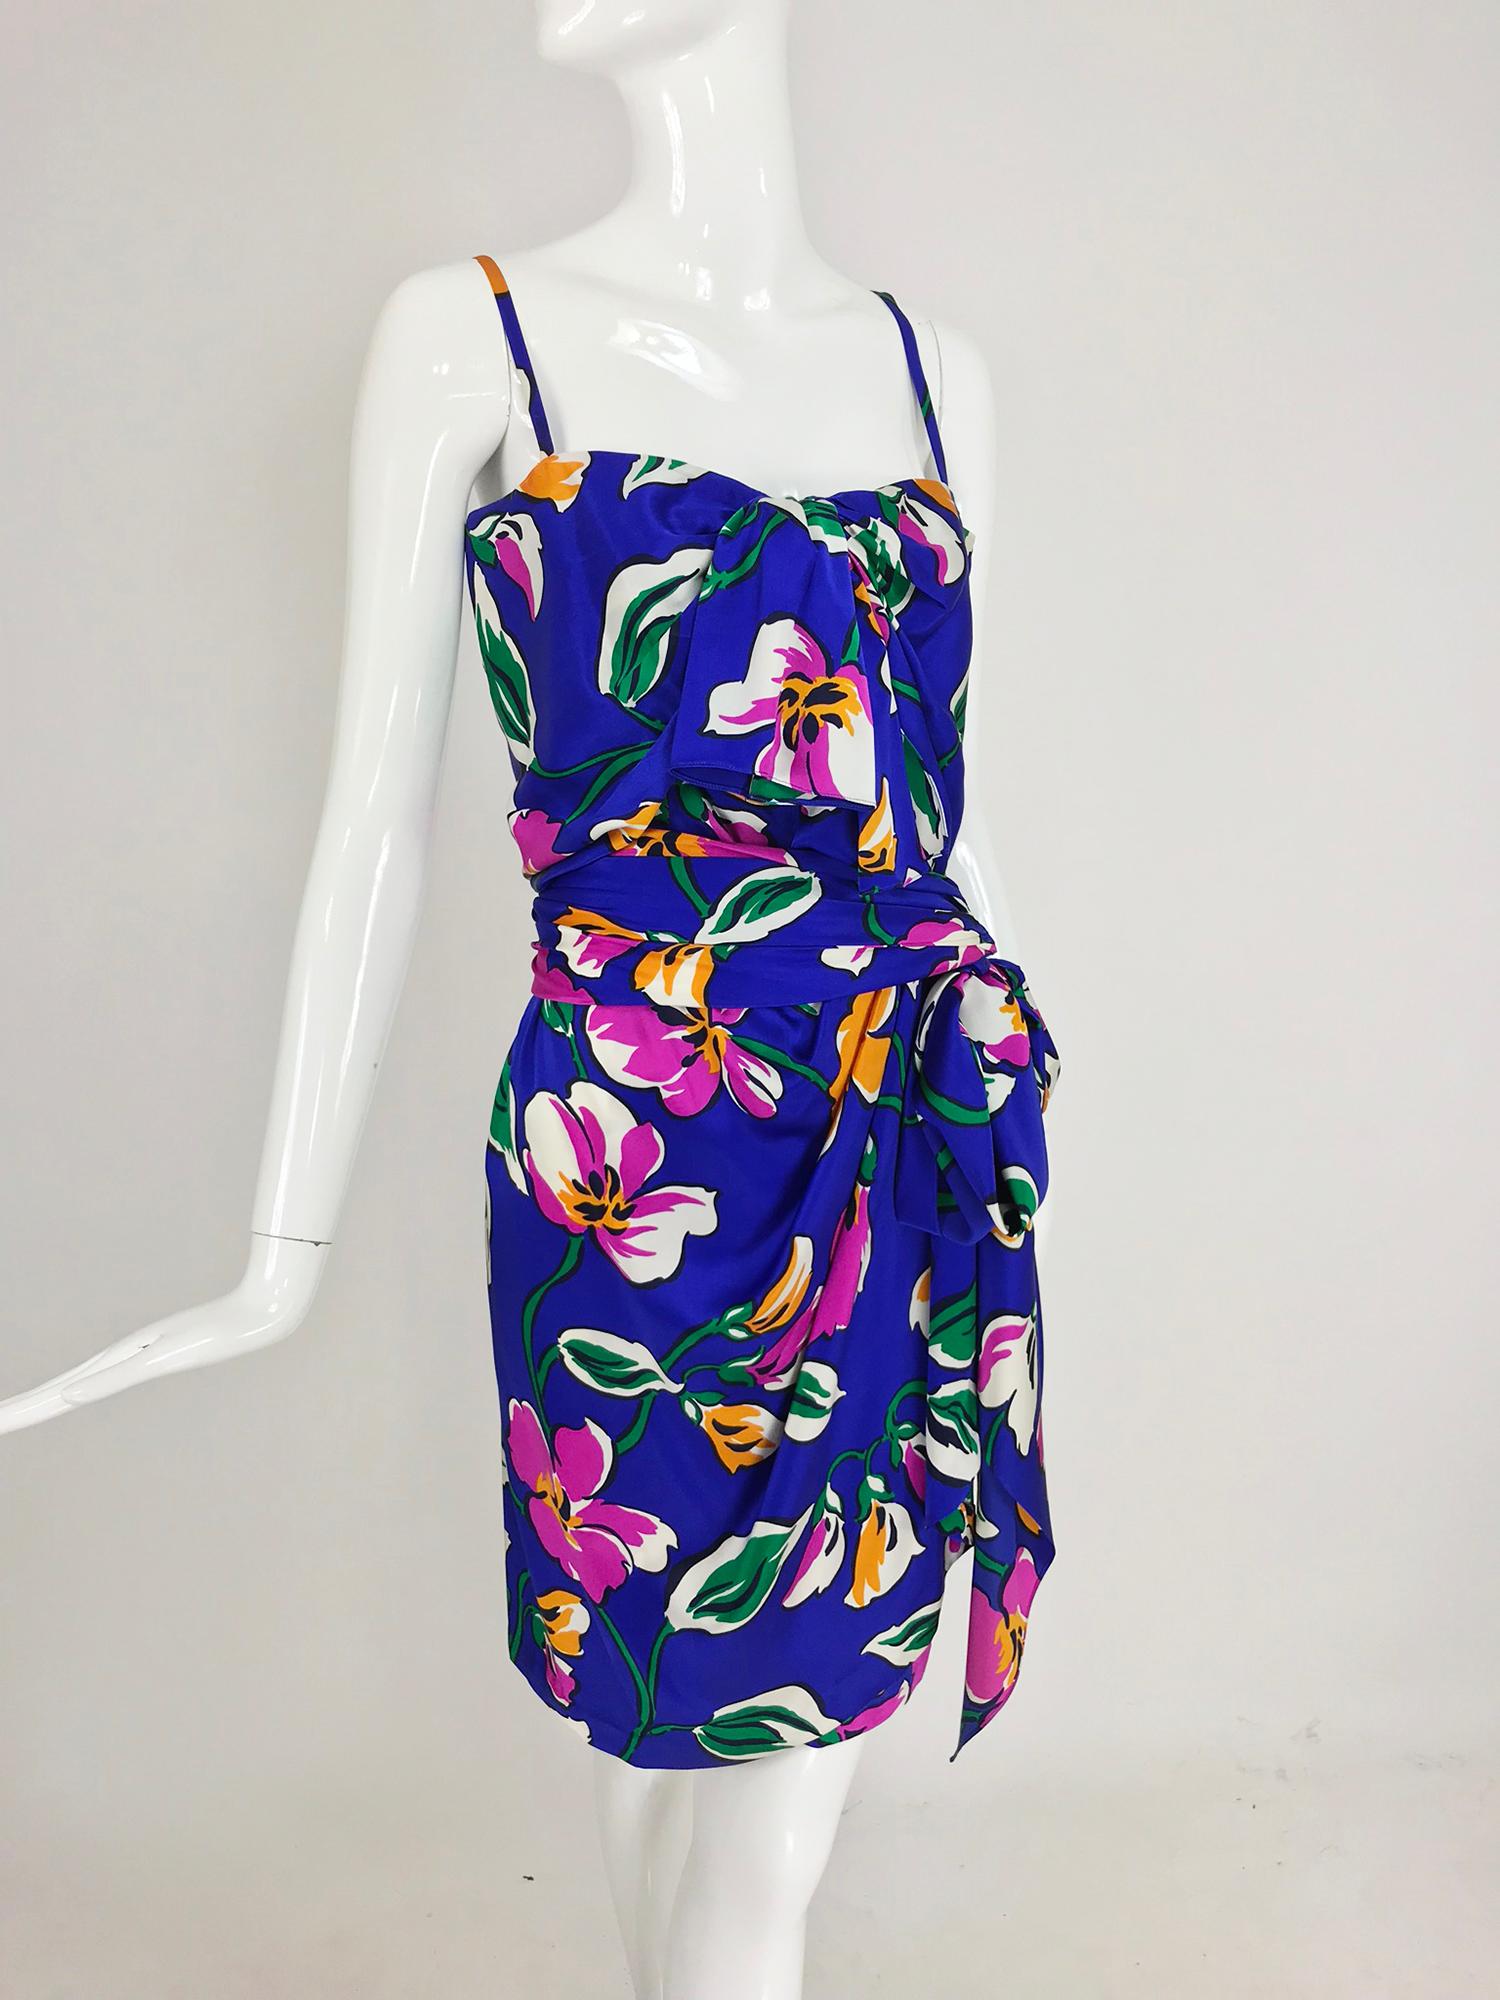 Givenchy Nouvelle Boutique tropical silk satin sarong dress from the 1980s. Silk satin tropical print dress with a deep purple blue ground. The dress has spaghetti straps, the bodice closes at the front with a hidden zipper, there is a tie at the